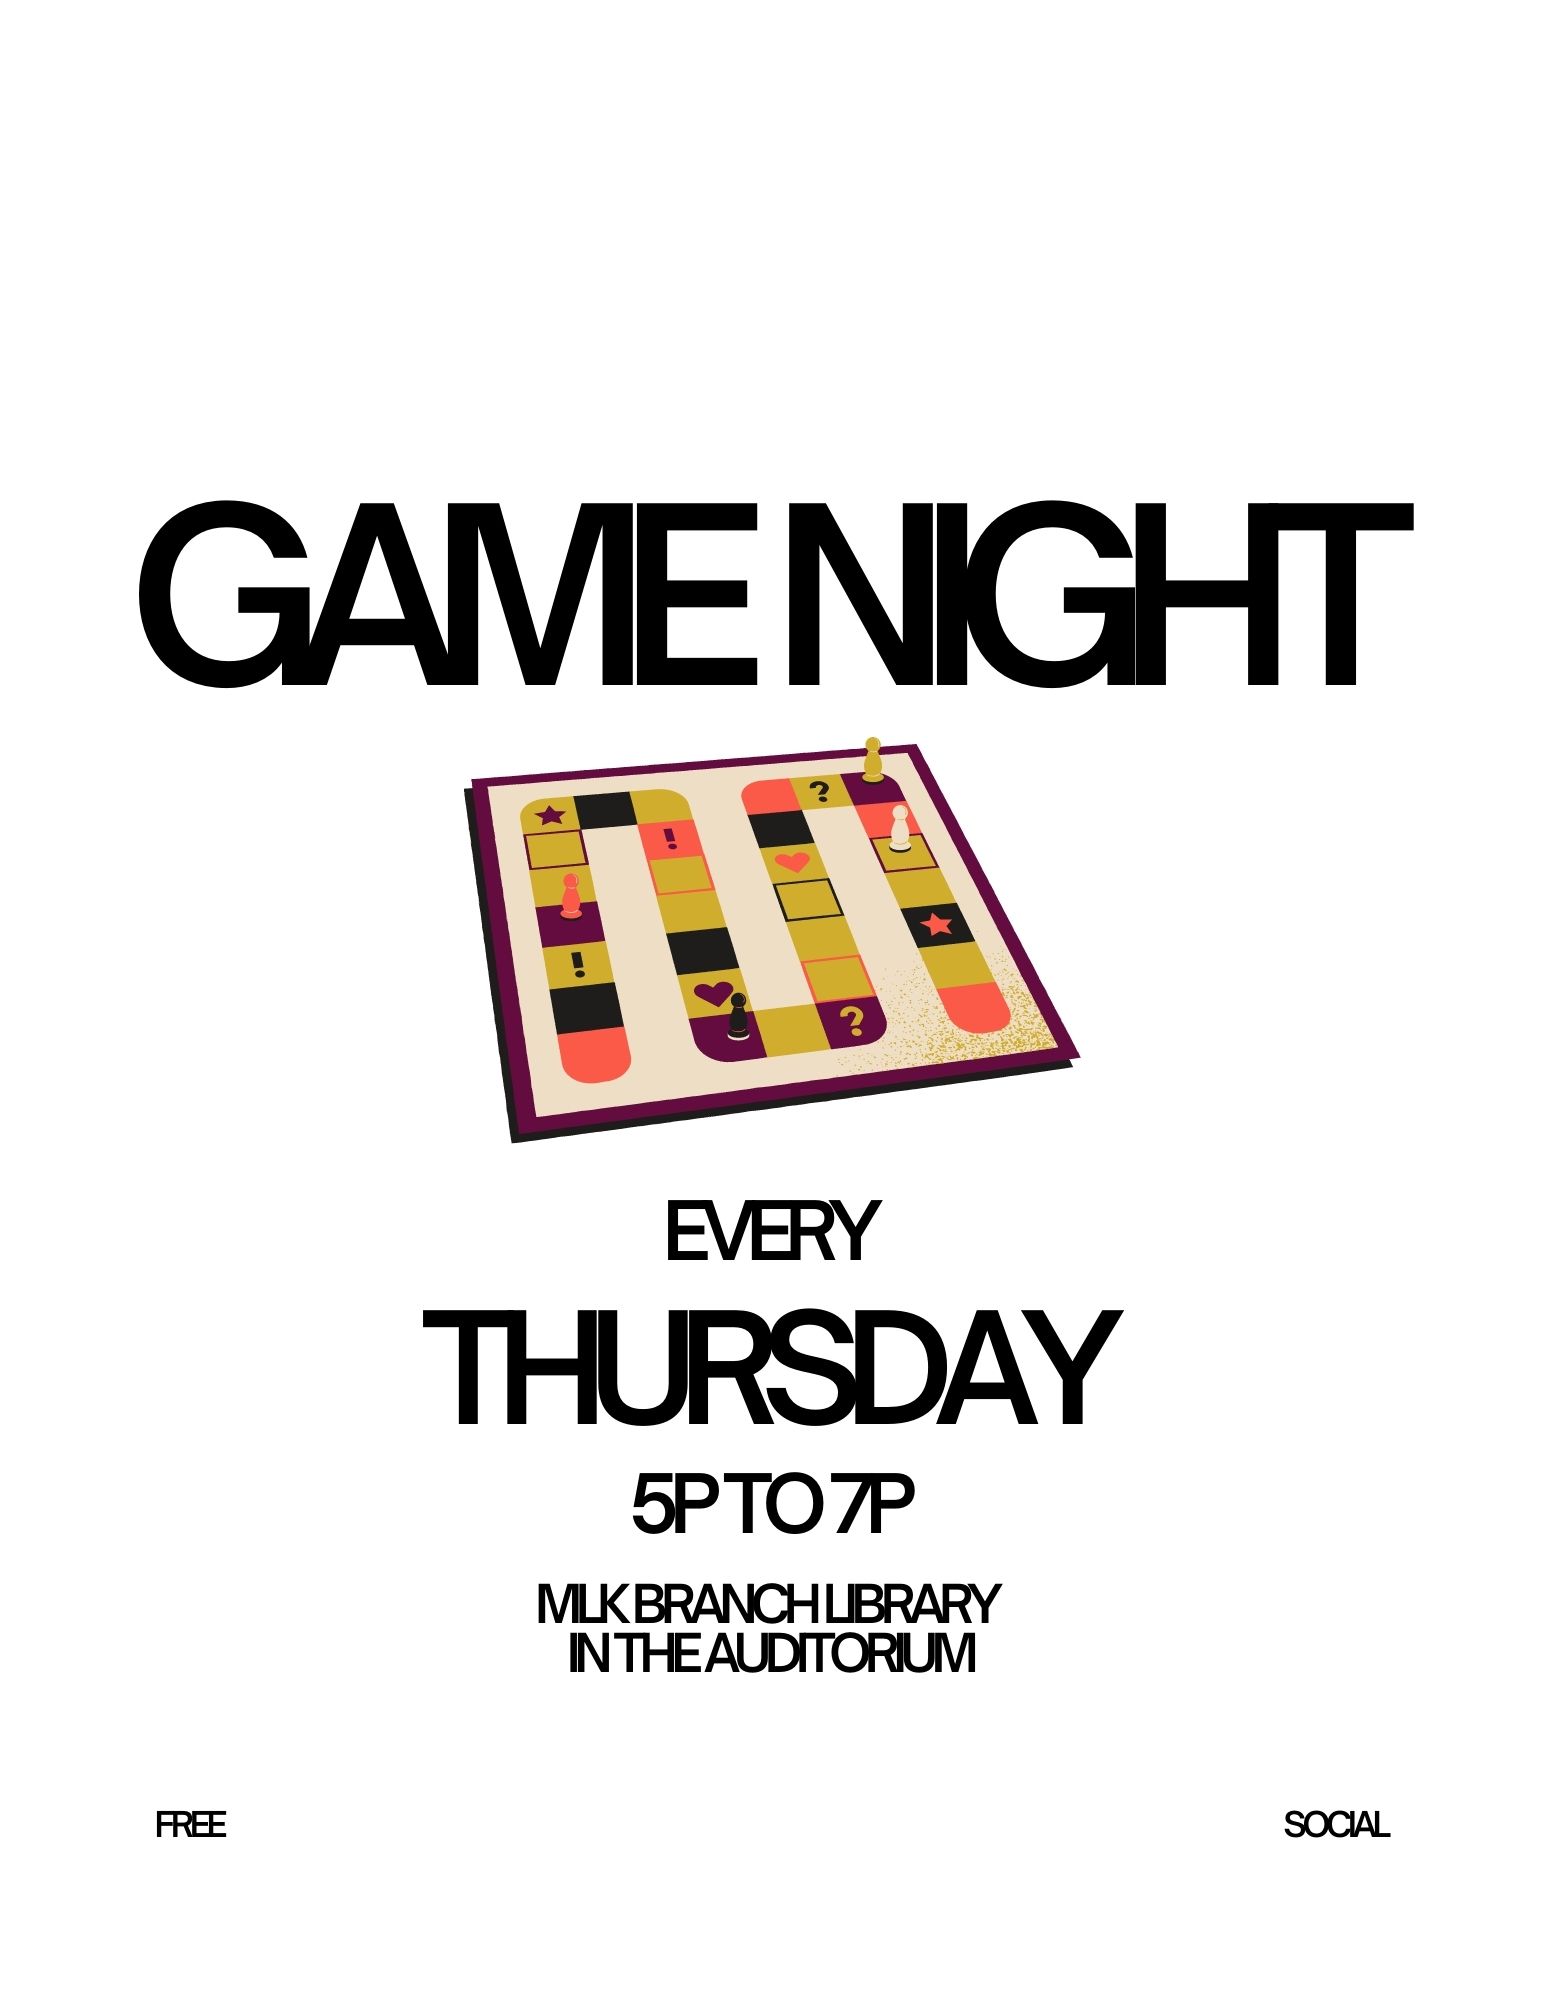 Flyer promoting game night at the Martin Luther King Branch Library Auditorium in Dallas Texas. This event occurs every thursday from 5 to 7 PM. It is a free social event